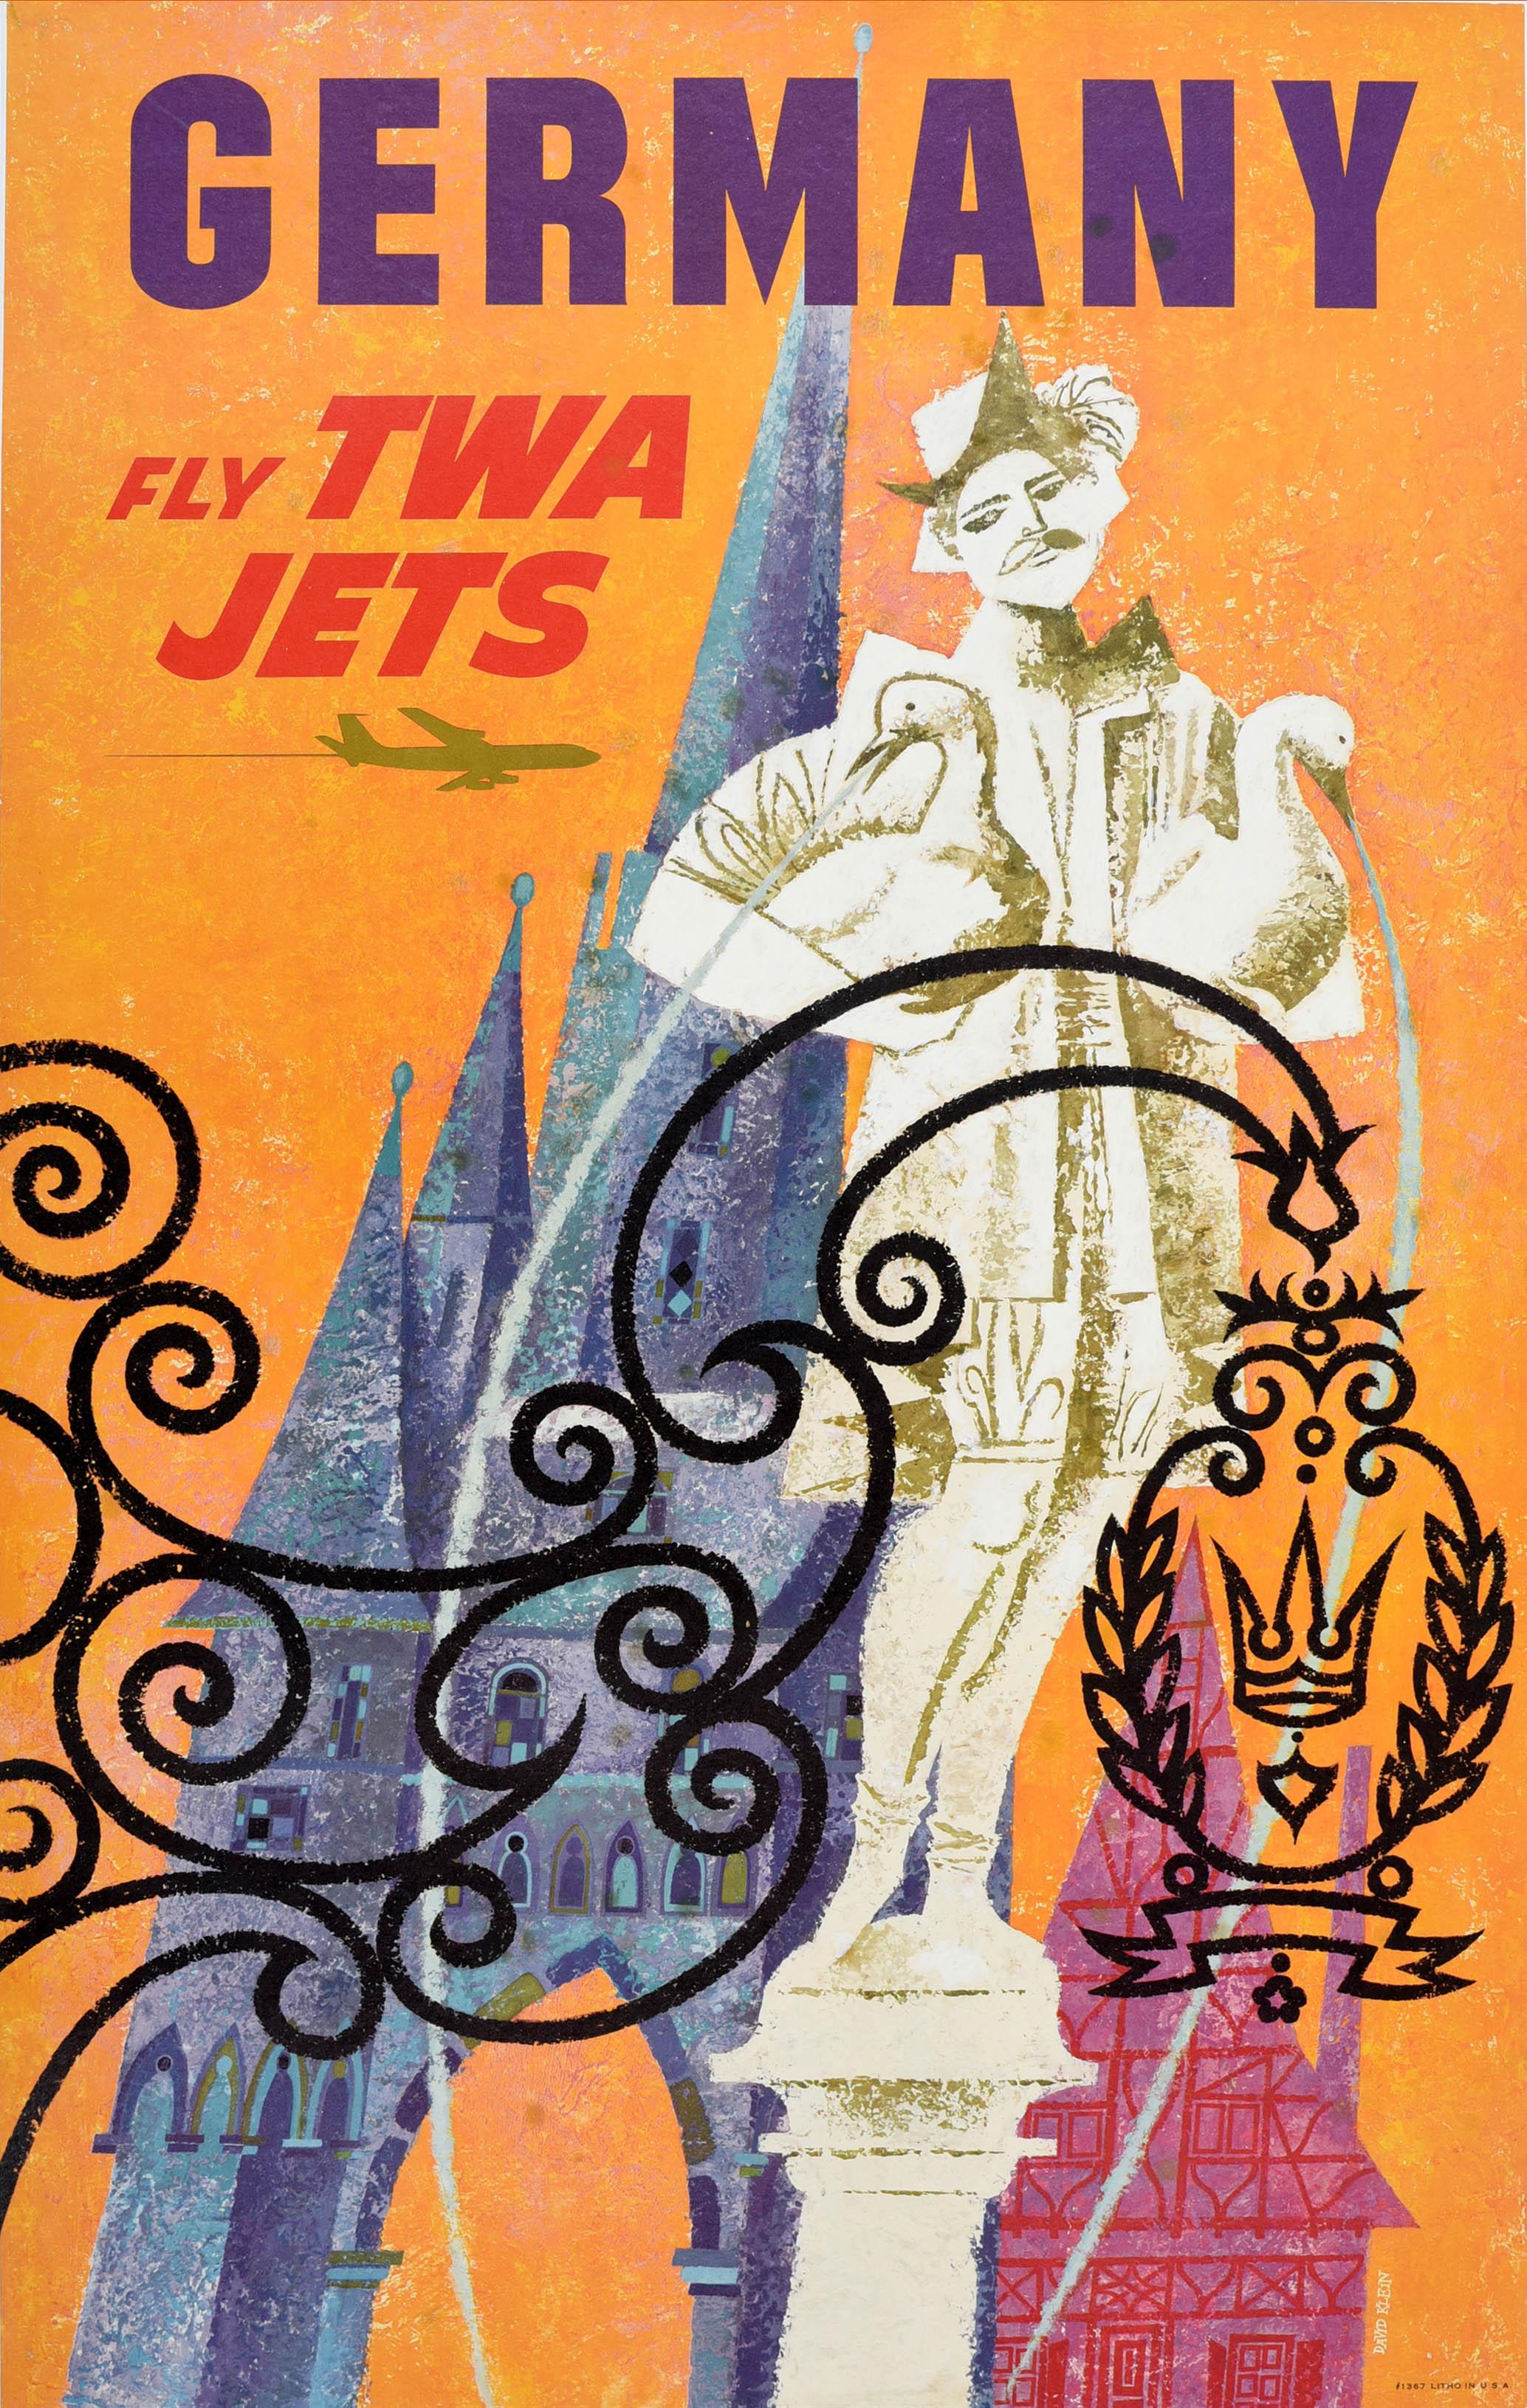 Original vintage travel poster for Germany Fly TWA Jets designed by the American artist David Klein (1918-2005), most noted for his TWA travel advertising poster artwork, featuring a fountain statue and historical buildings behind a decorative